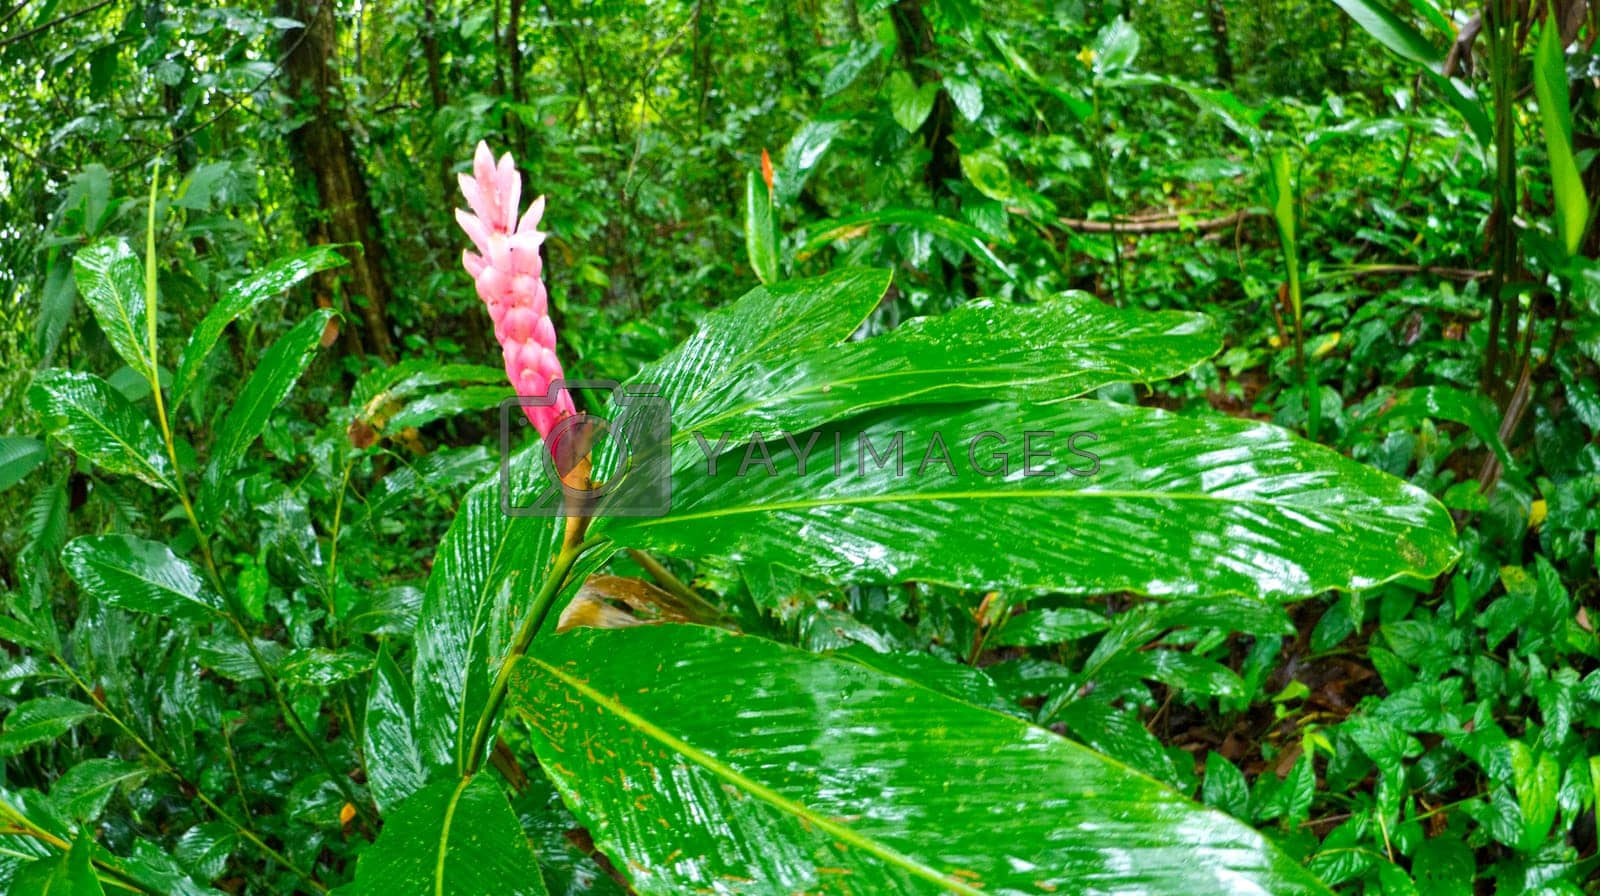 Royalty free image of Tropical Flower, Marino Ballena National Park, Costa Rica by alcaproac